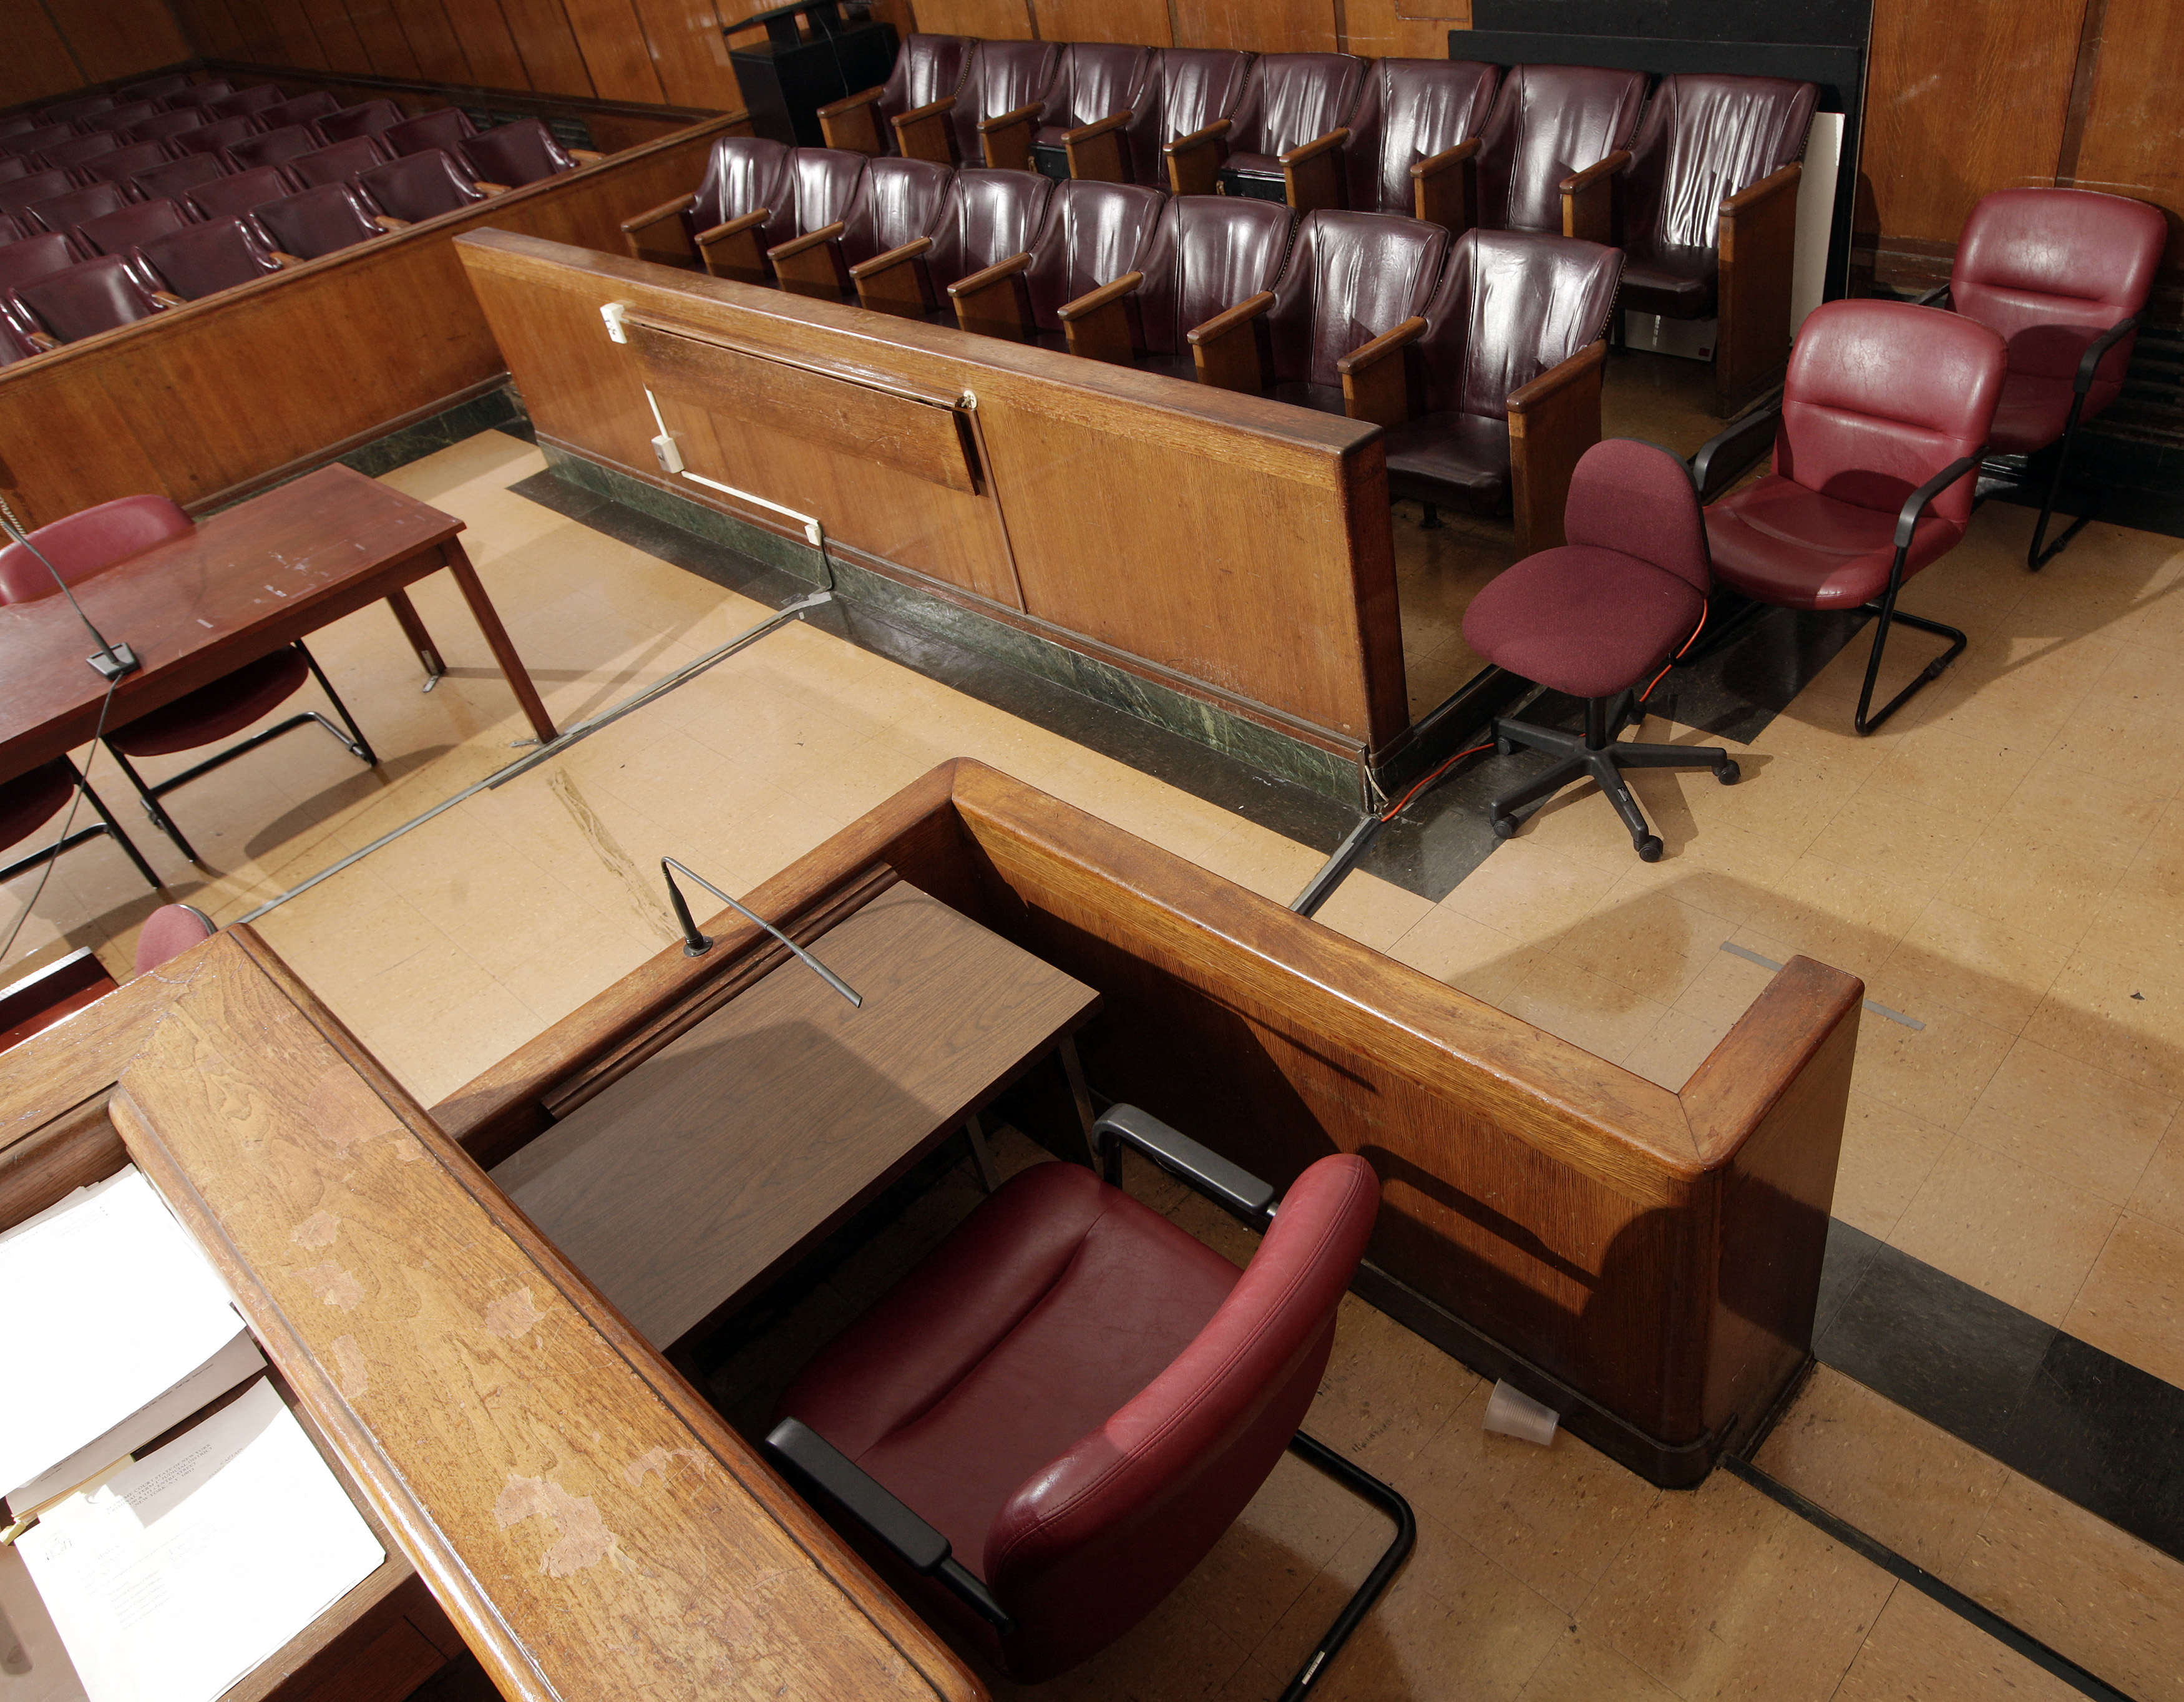 The witness stand (front), jury box (rear R) and the defense table (rear L), in Part 31, Room 1333 of the New York State Supreme Court, Criminal Term at 100 Centre Street, in New York